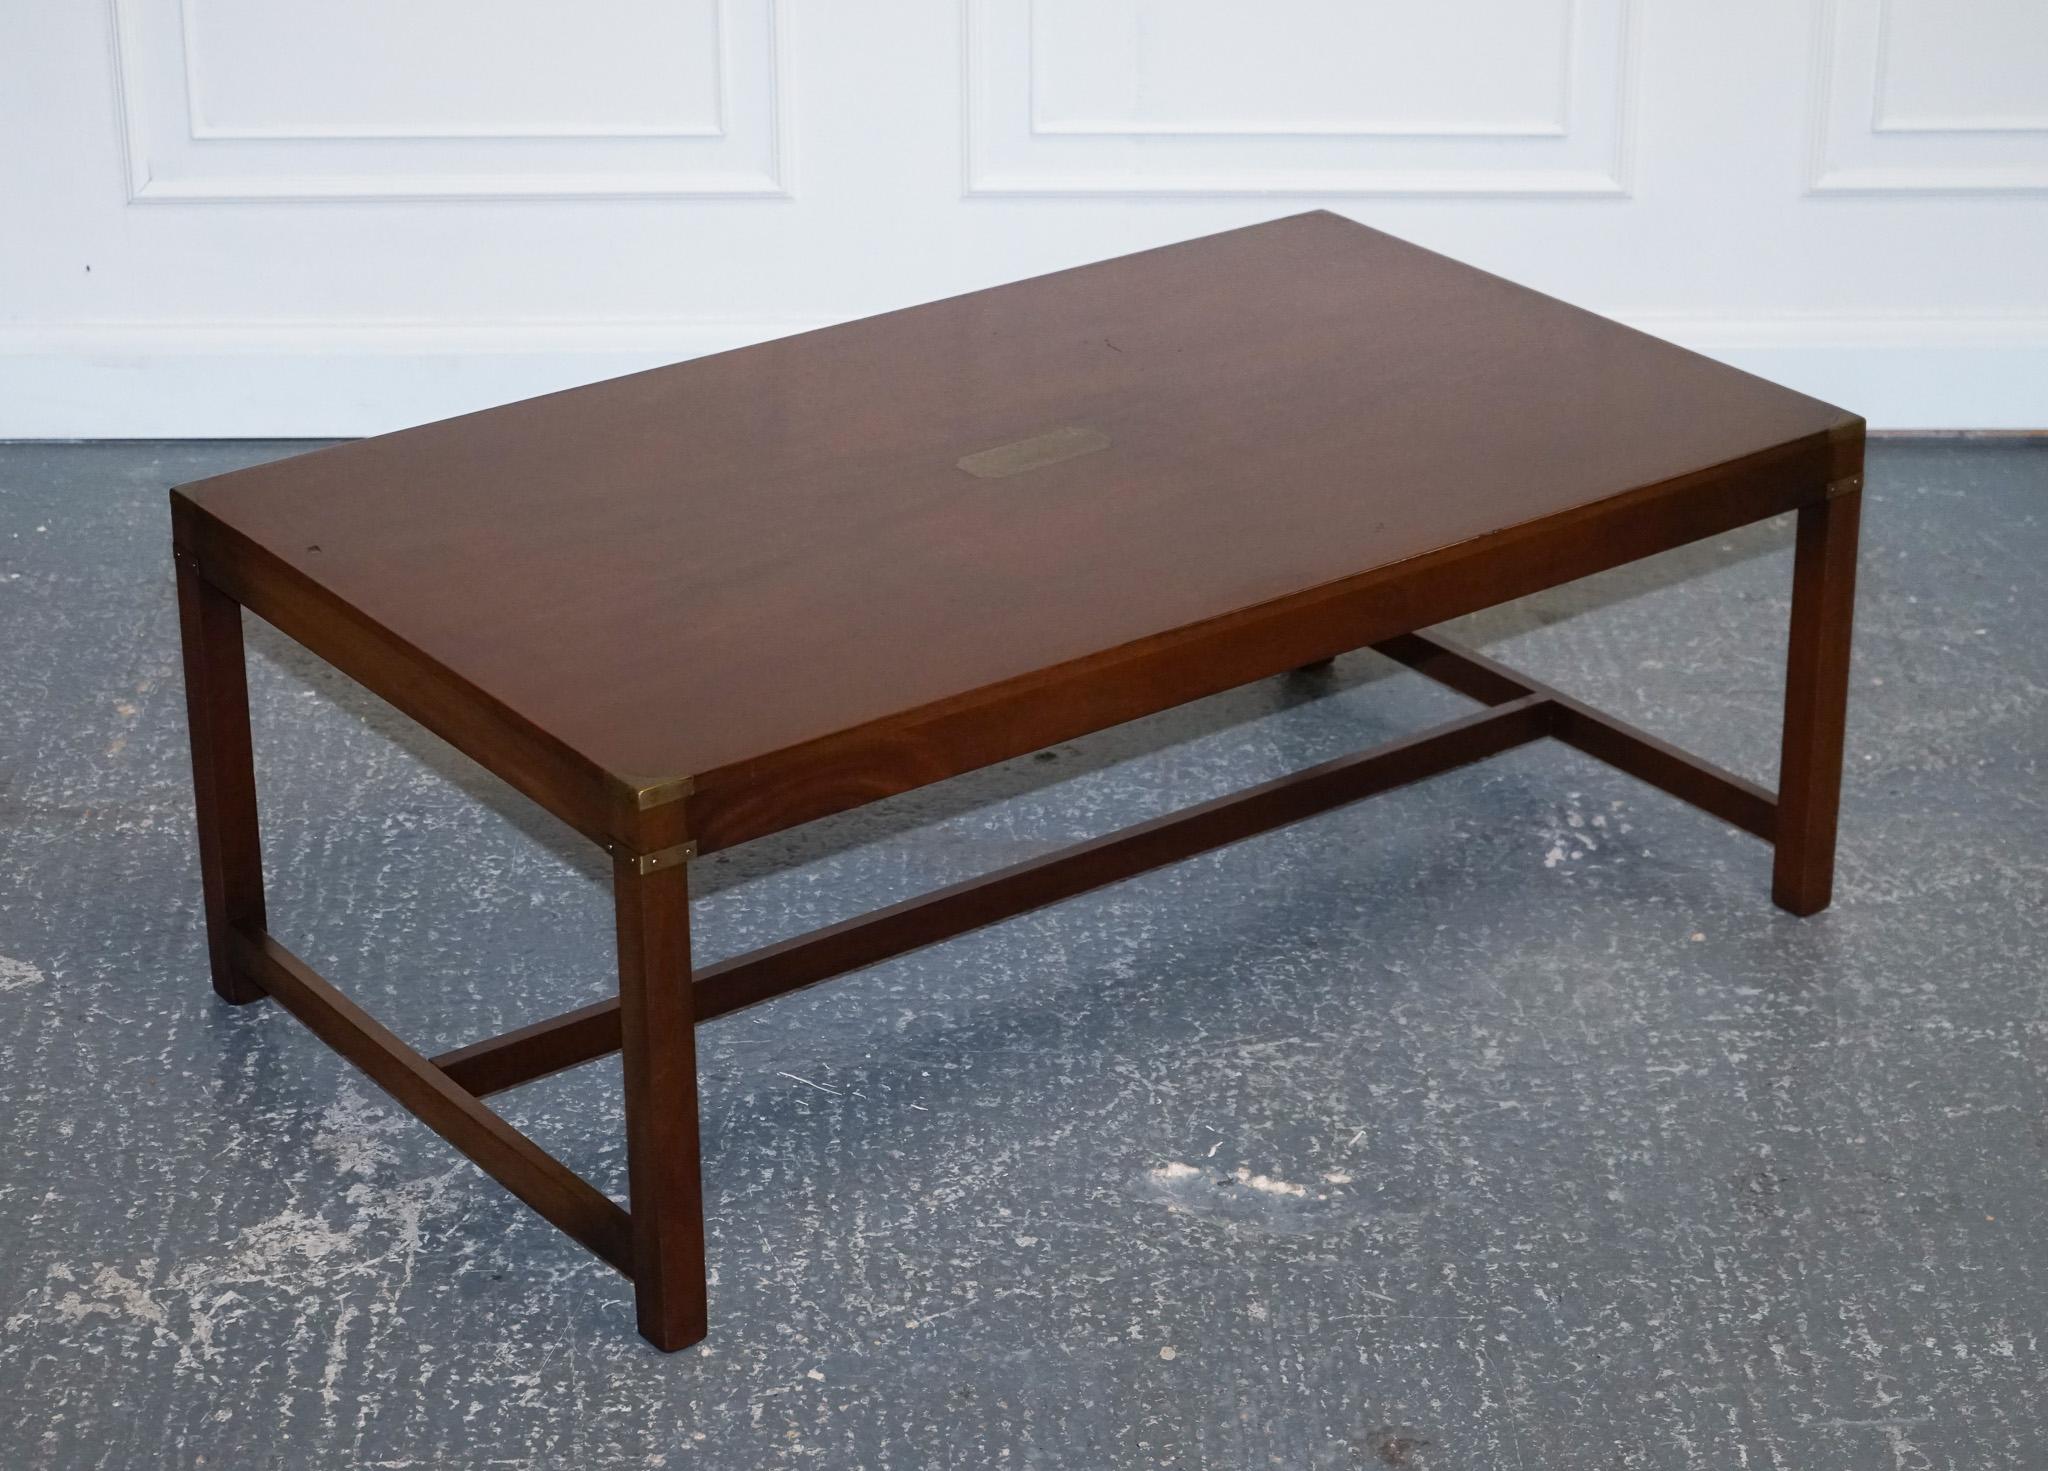 We are delighted to offer for sale this Stunning Extra Large Military Campaign Coffee Table.

The Large campaign military coffee table made by R.E.H Kennedy Furniture and retailed by Harrods in the 1970s is a true masterpiece of furniture design.